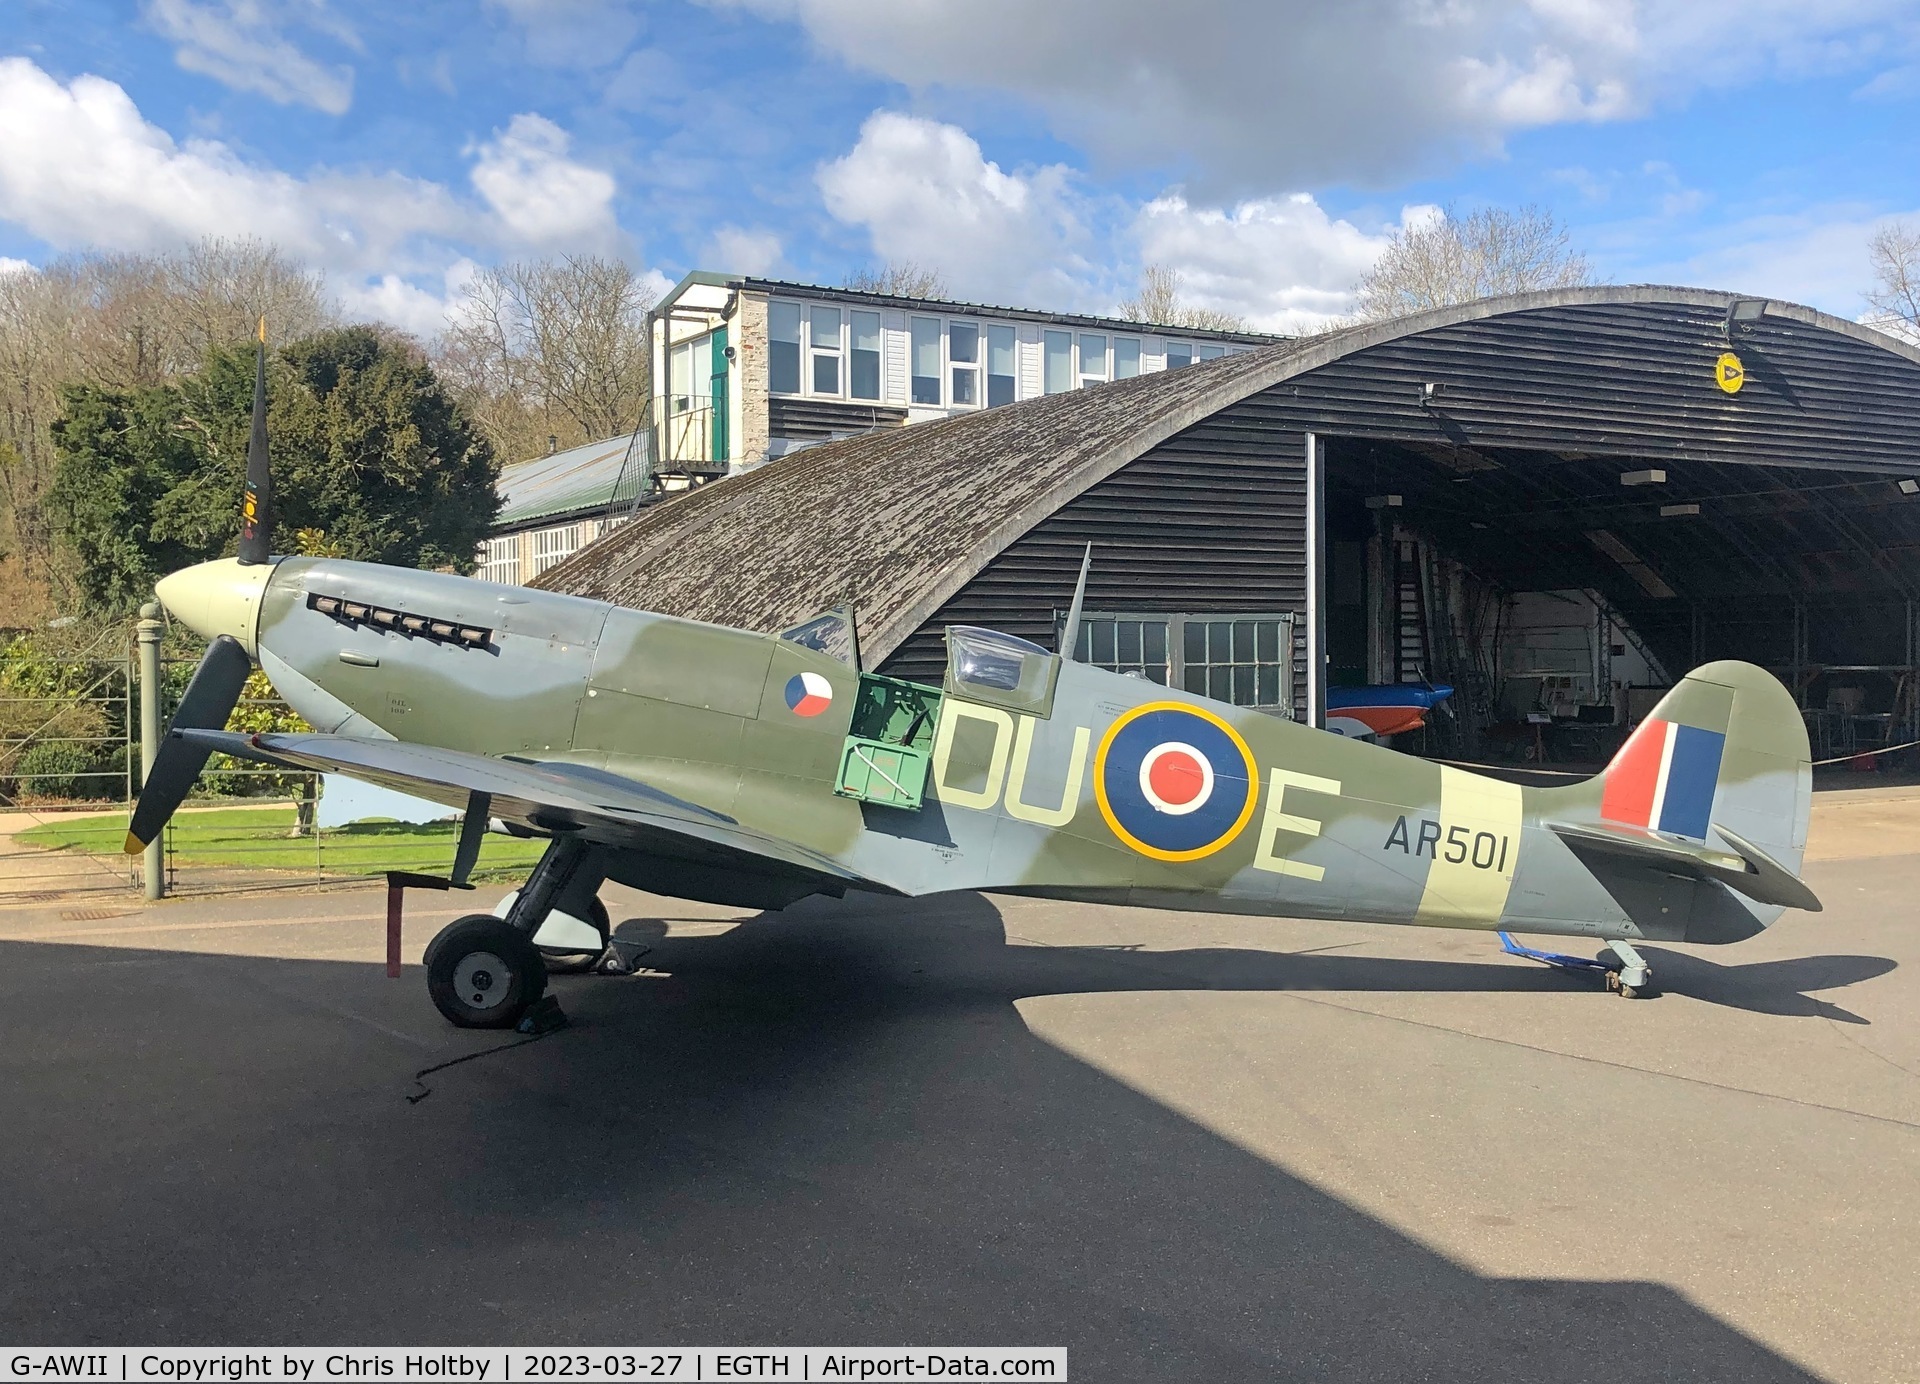 G-AWII, 1942 Supermarine 349 Spitfire LF.Vc C/N WASP/20/223, Wheeled out in front of the engineering hangar to welcome visitors back to the Old Warden cafe & shop (free of charge at last!).